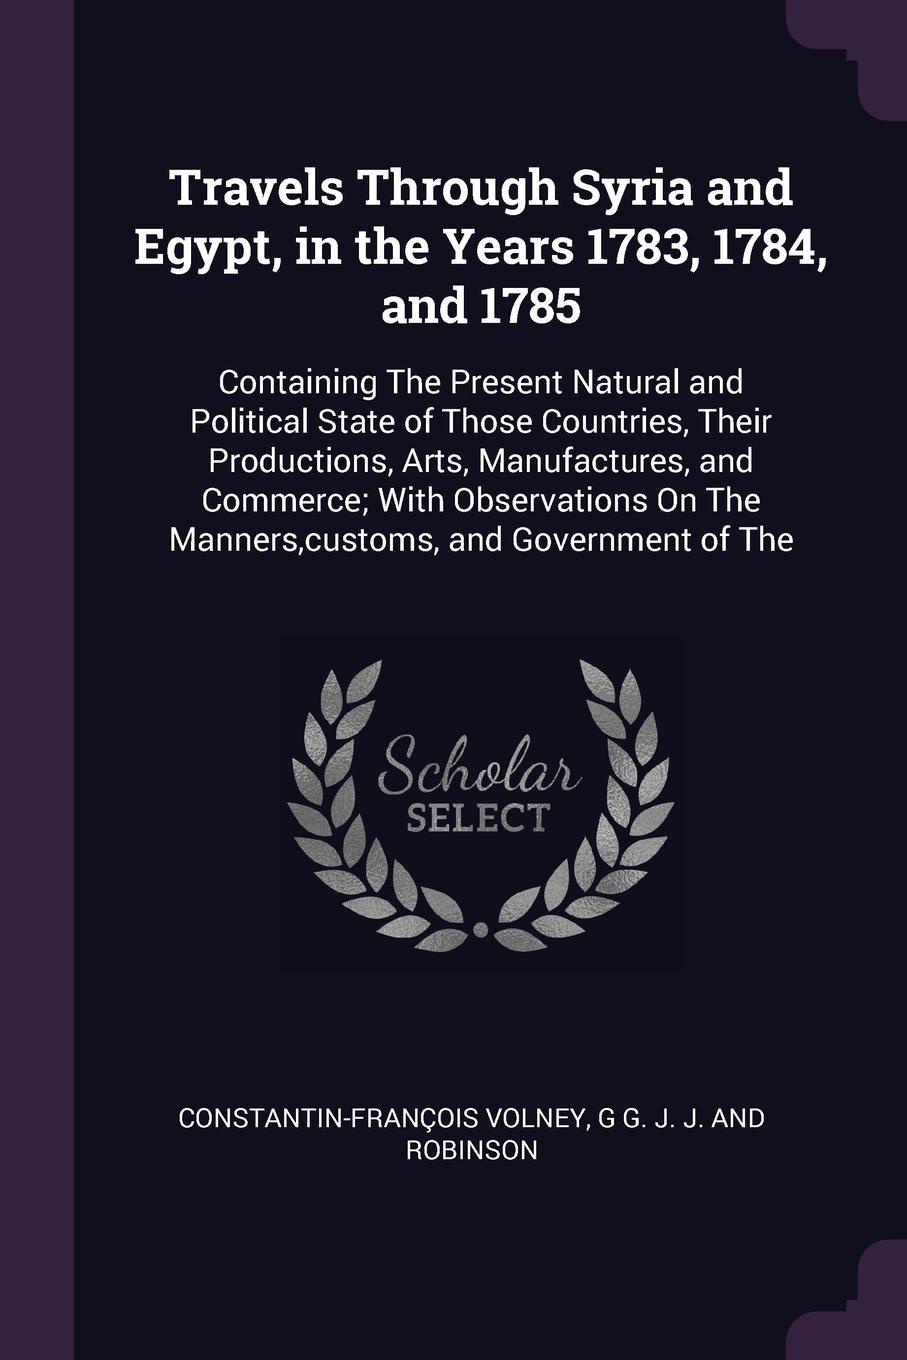 Travels Through Syria and Egypt, in the Years 1783, 1784, and 1785. Containing The Present Natural and Political State of Those Countries, Their Productions, Arts, Manufactures, and Commerce; With Observations On The Manners,customs, and Governmen...